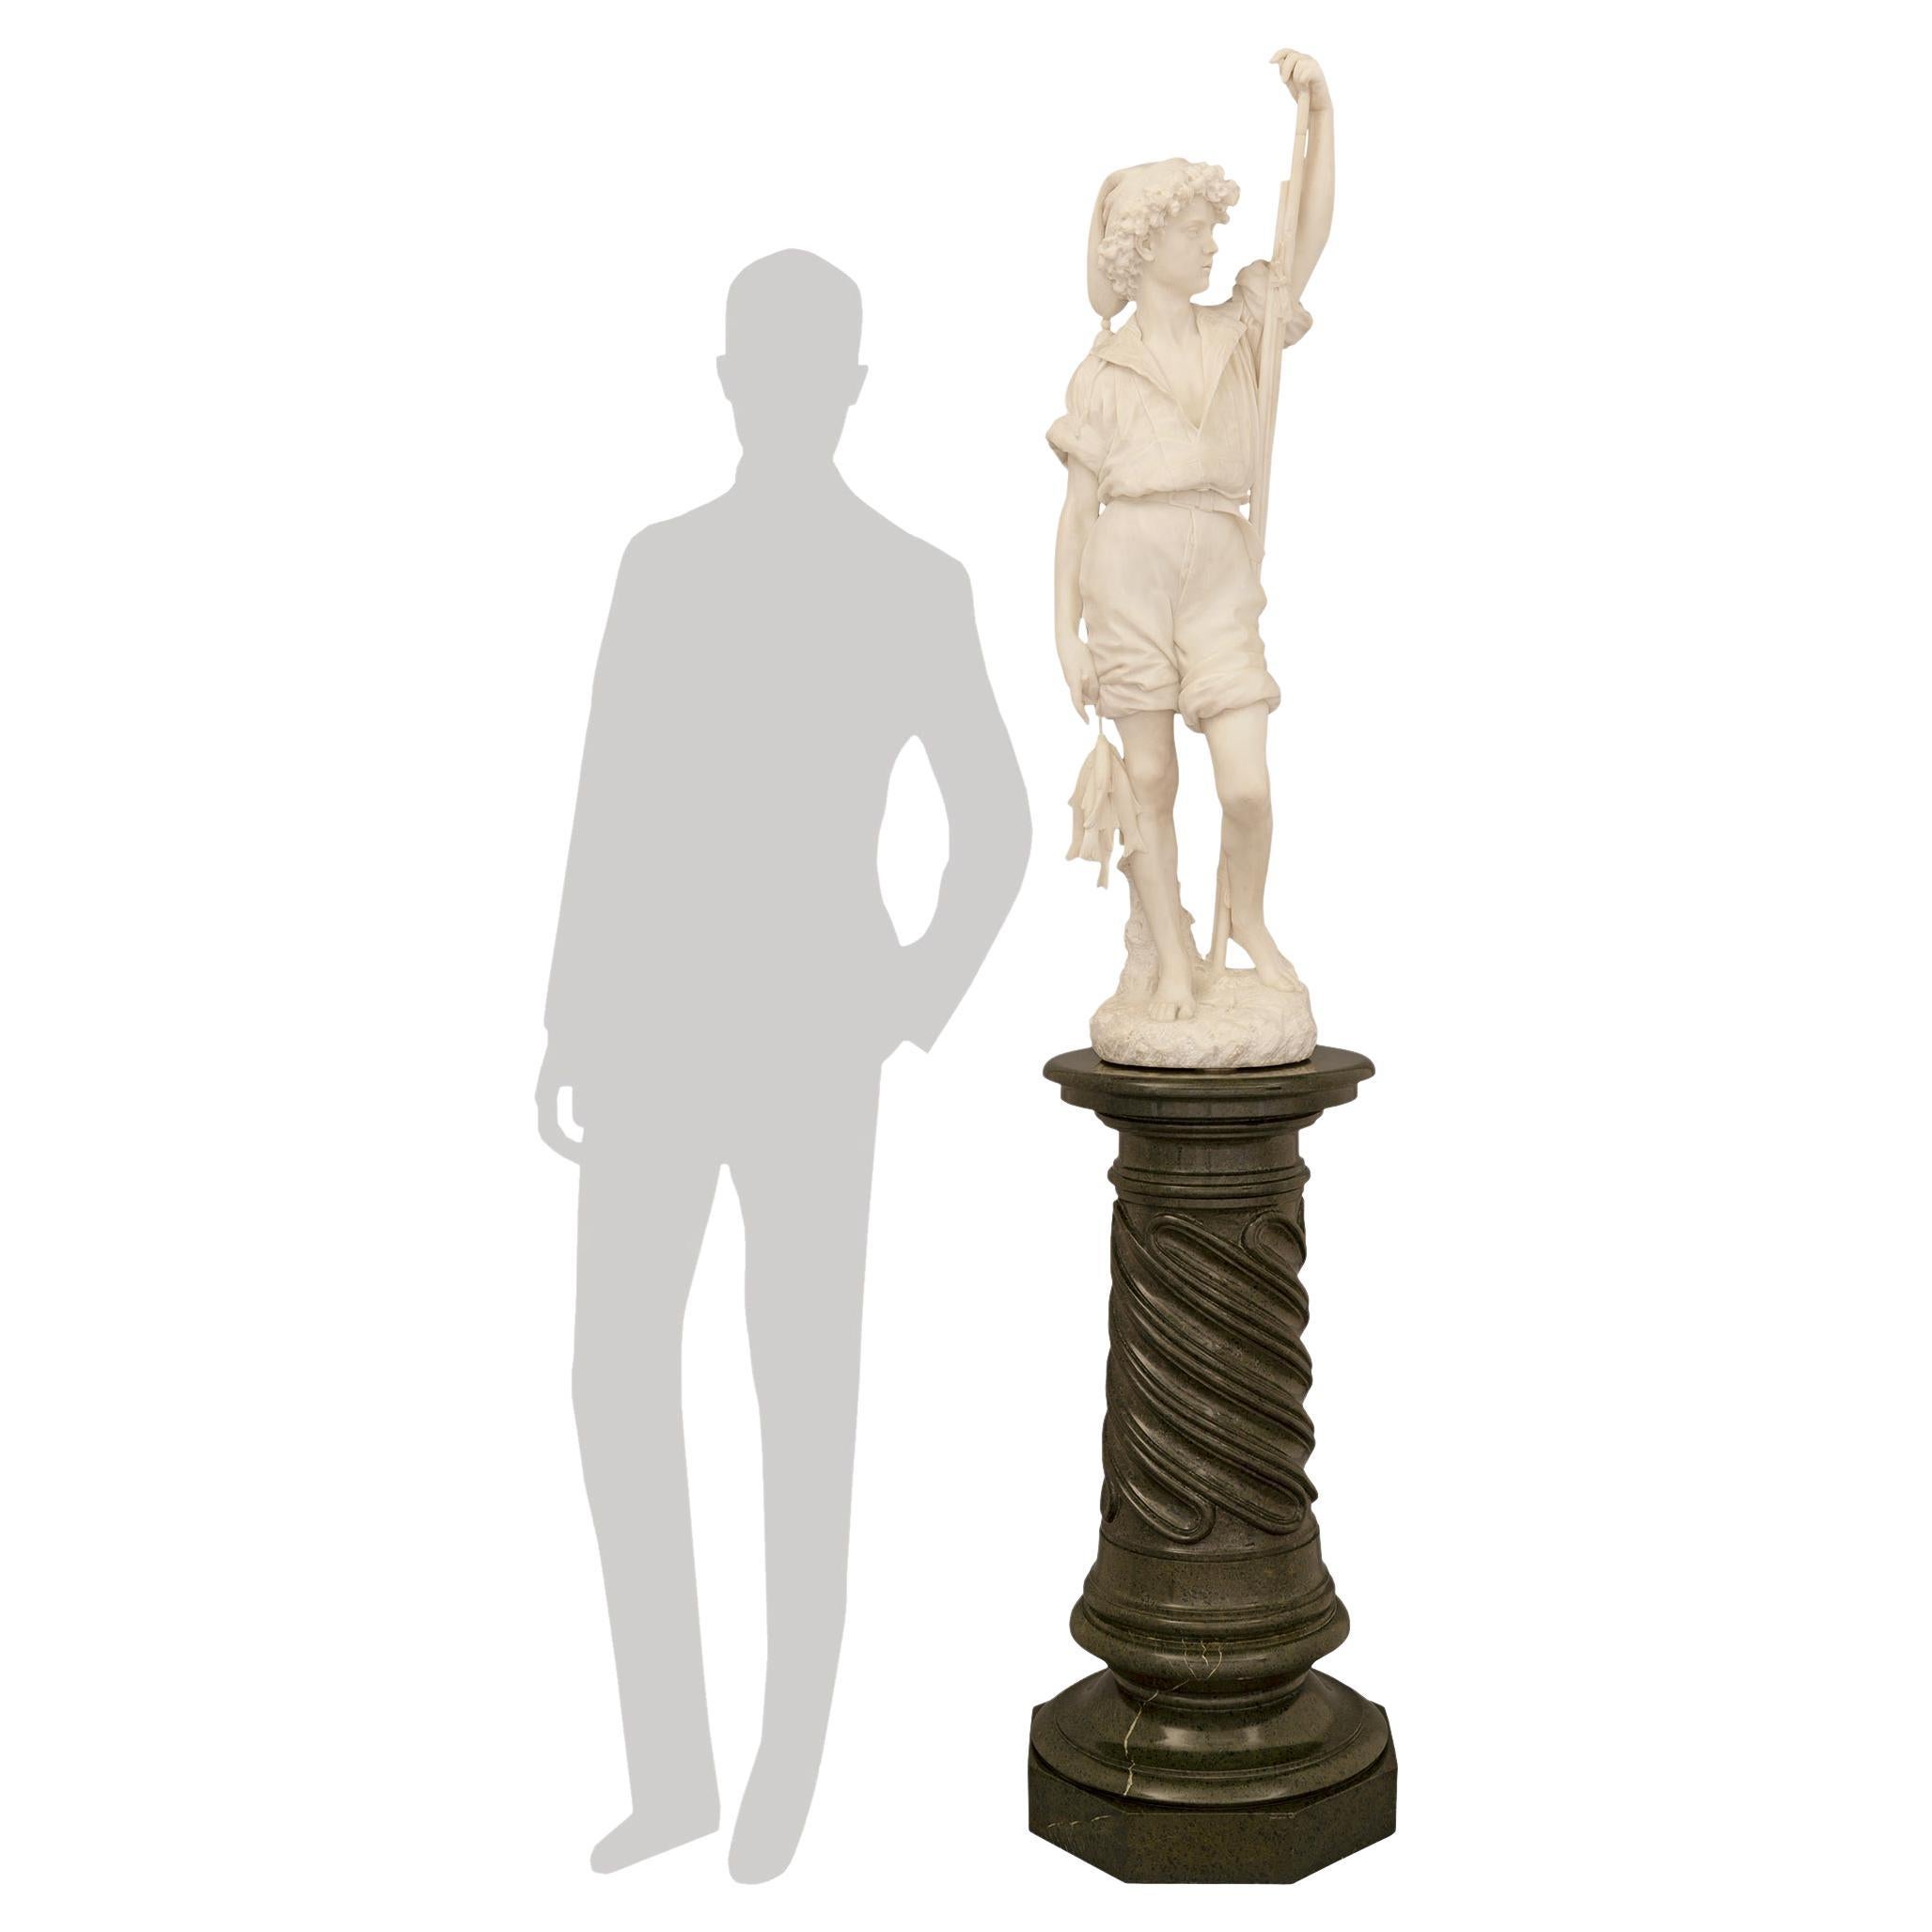 Italian 19th Century Marble Statue of a Fisher Boy on a Marble Pedestal